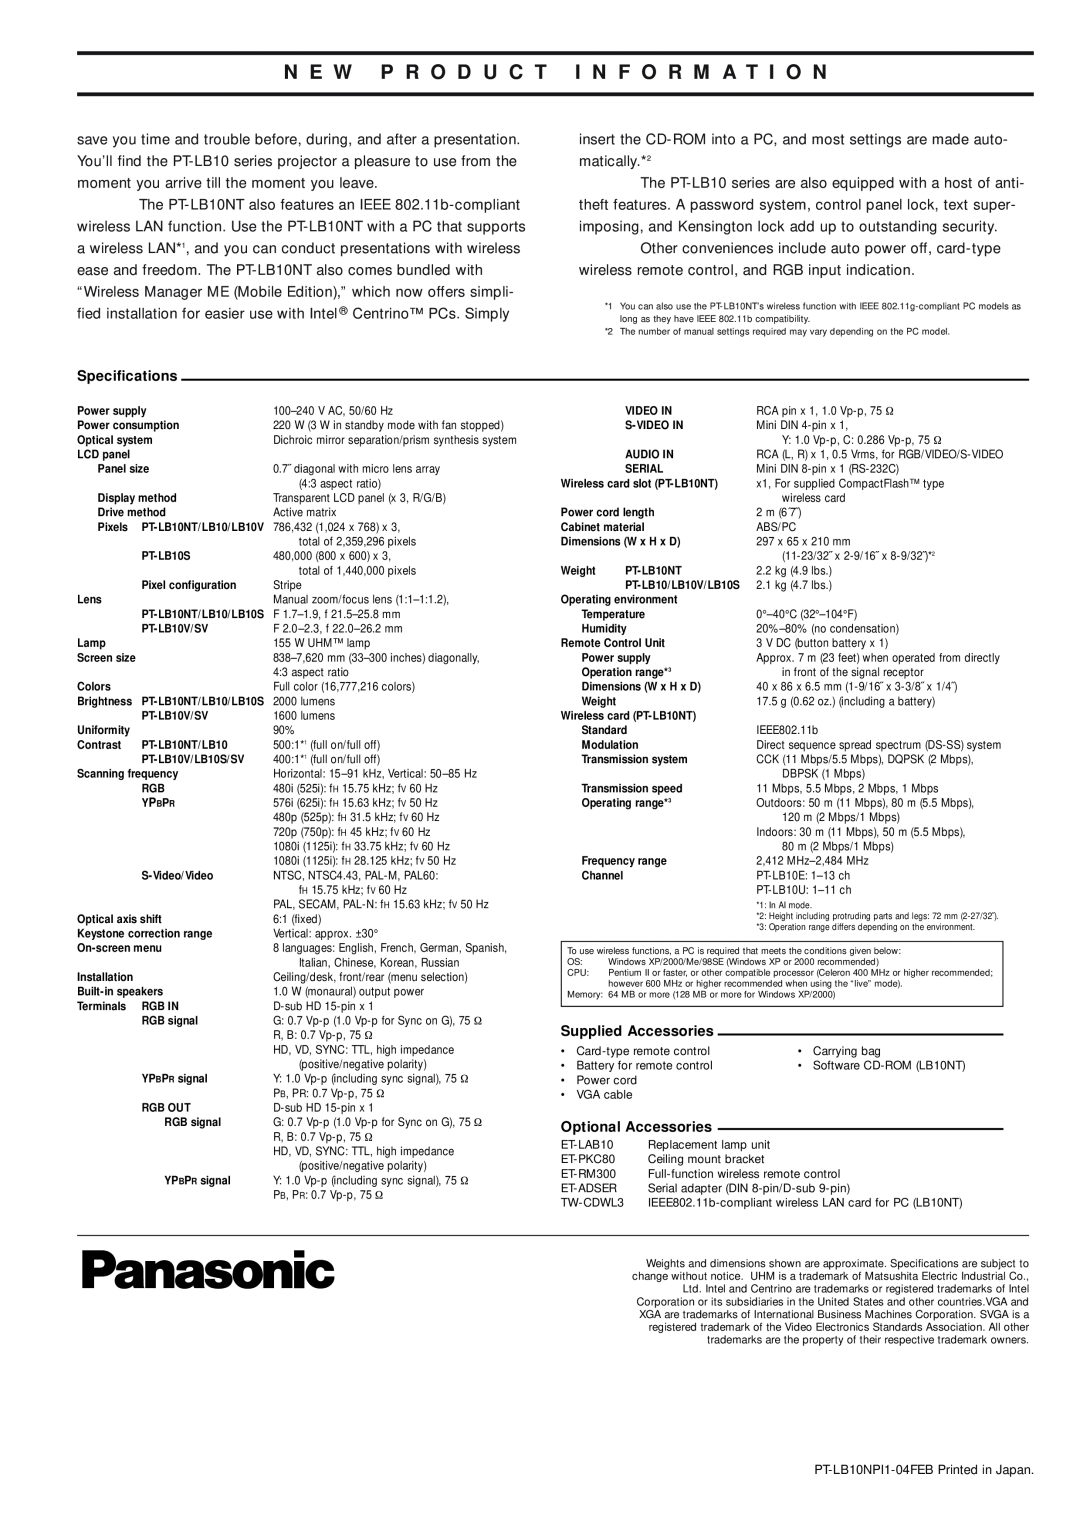 Panasonic PT-LB10NT N E W P R O D U C T I N F O R M A T I O N, Specifications, Supplied Accessories, Optional Accessories 